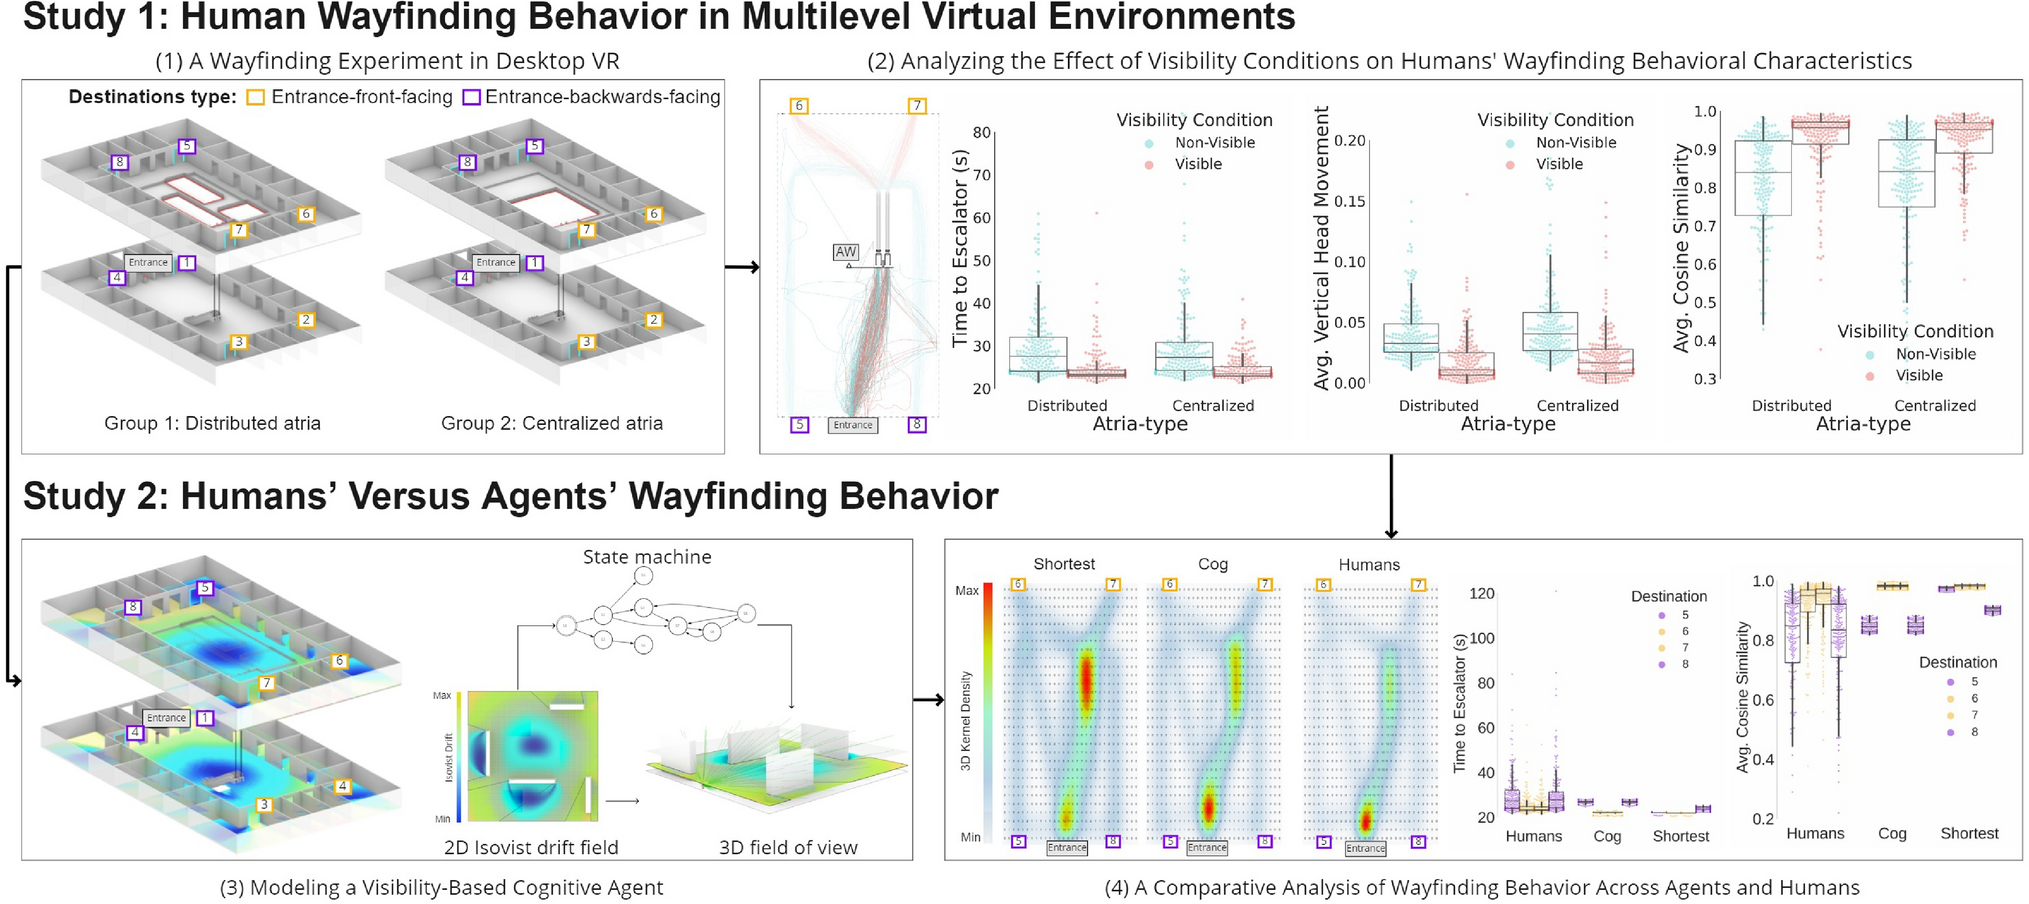 Visibility matters during wayfinding in the vertical | Scientific Reports